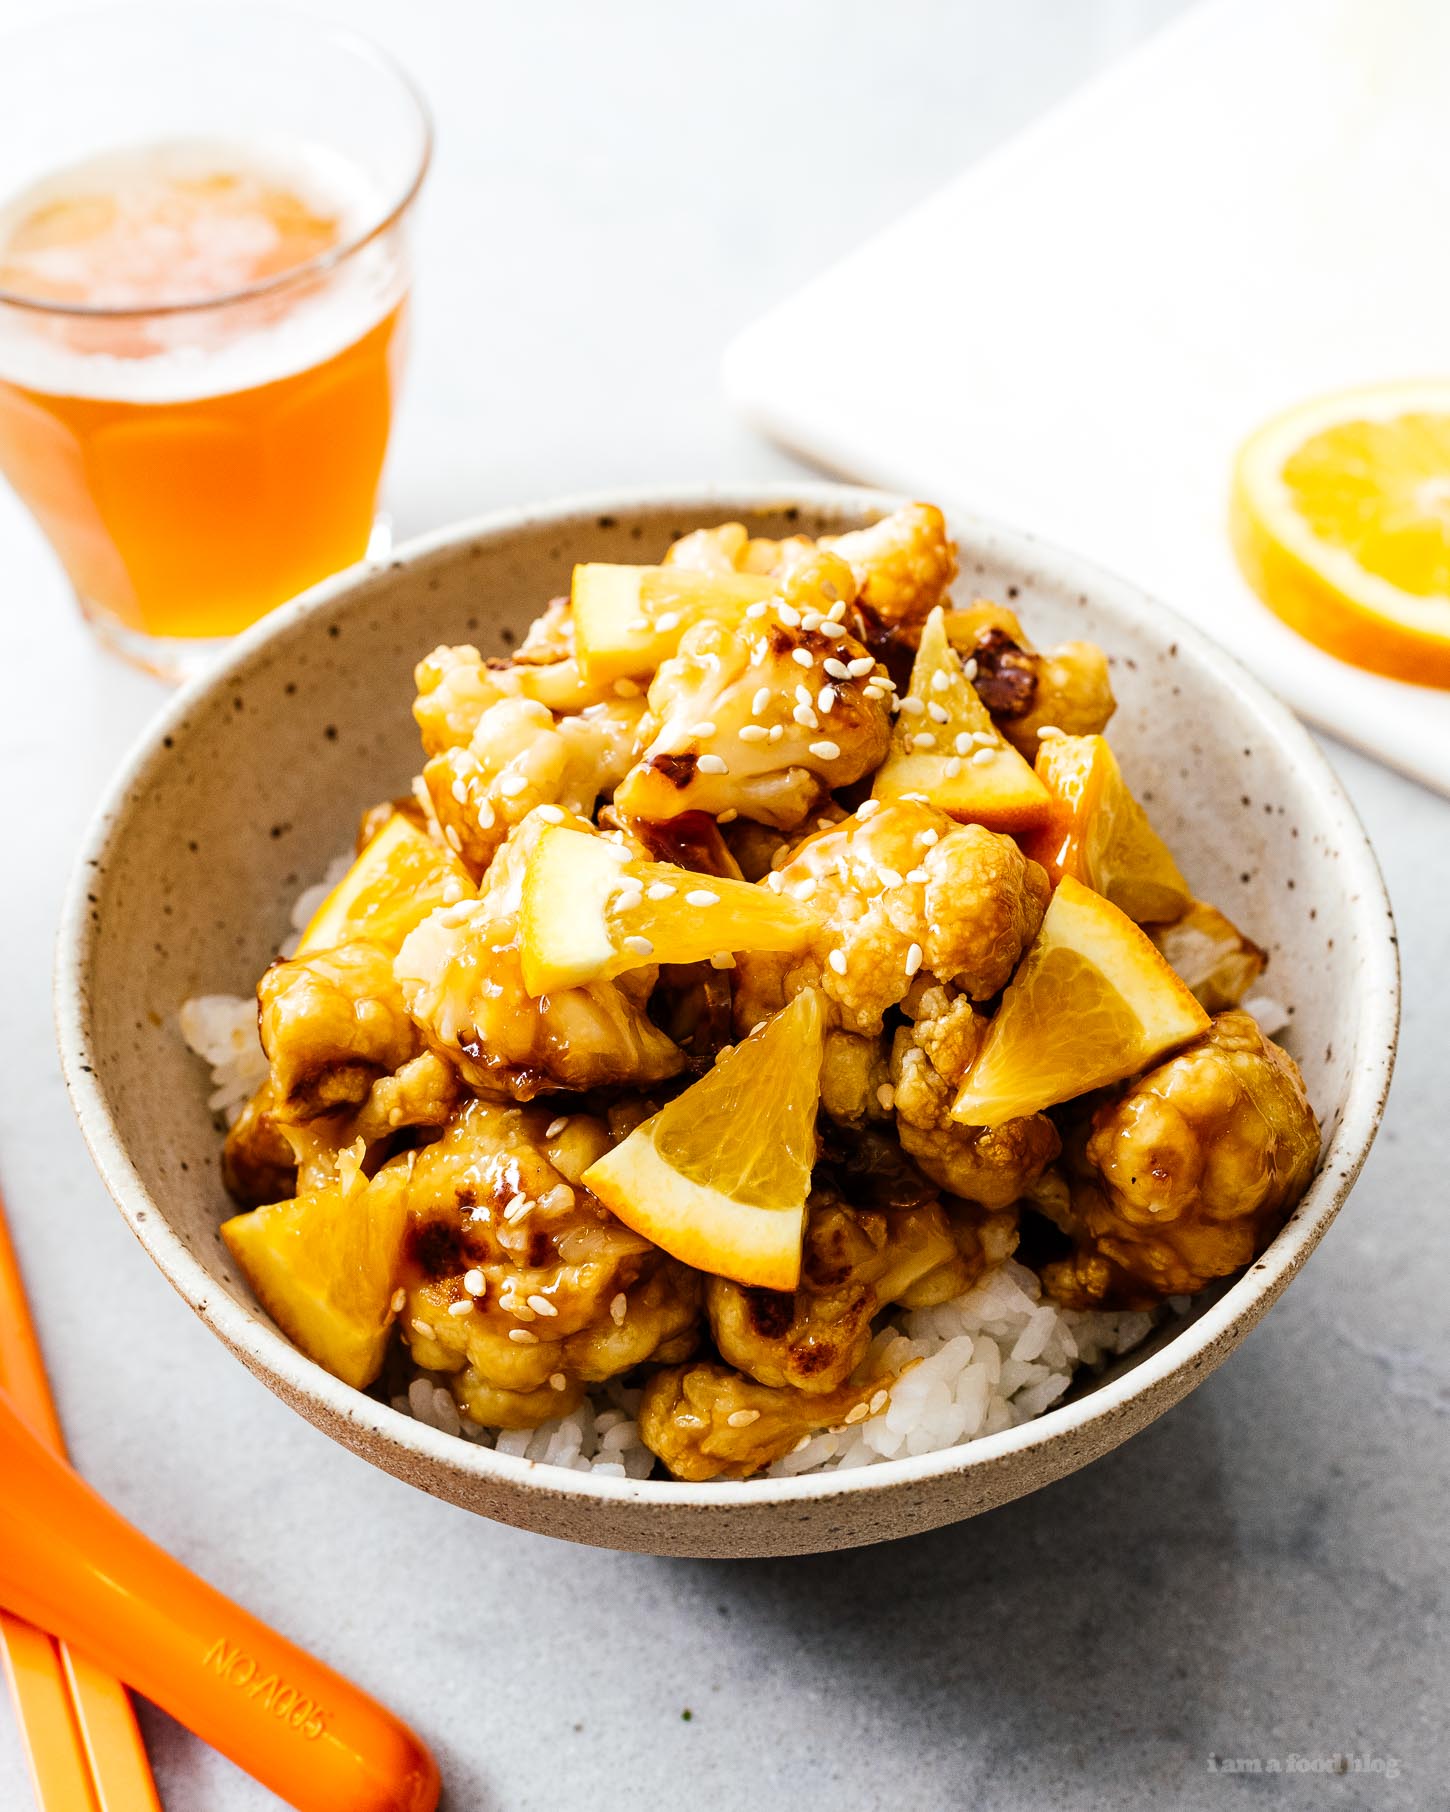 A super healthy, delicious, and easy oven broiled vegan orange cauliflower recipe. Everything that's great about orange chicken with zero guilt. #vegan #orangechicken #easyrecipes